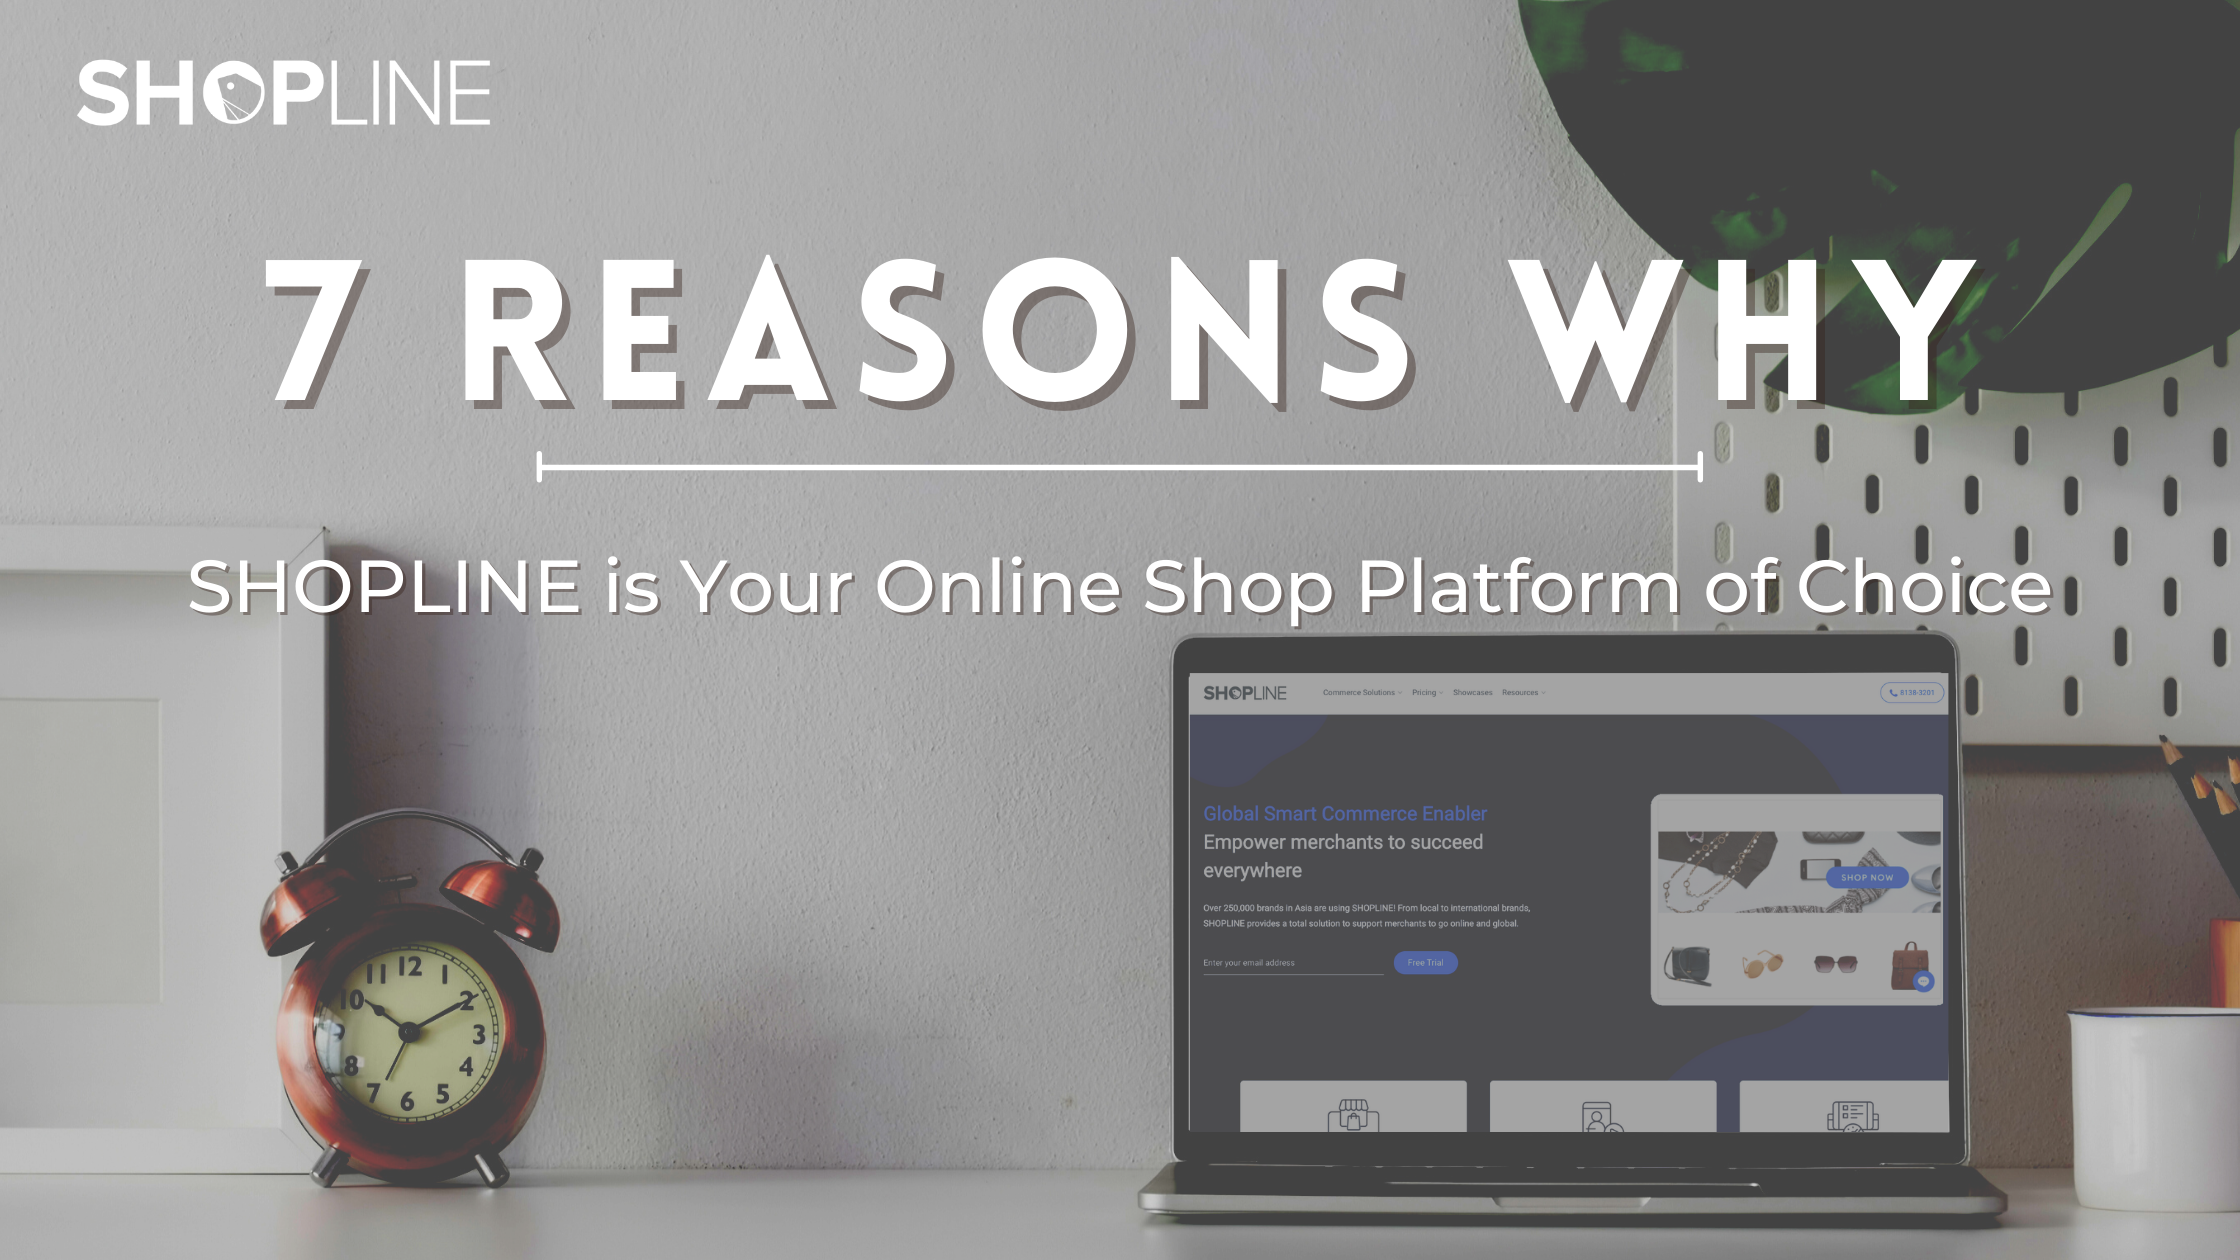 7 Reasons Why SHOPLINE is Your Online Shop Platform of Choice!